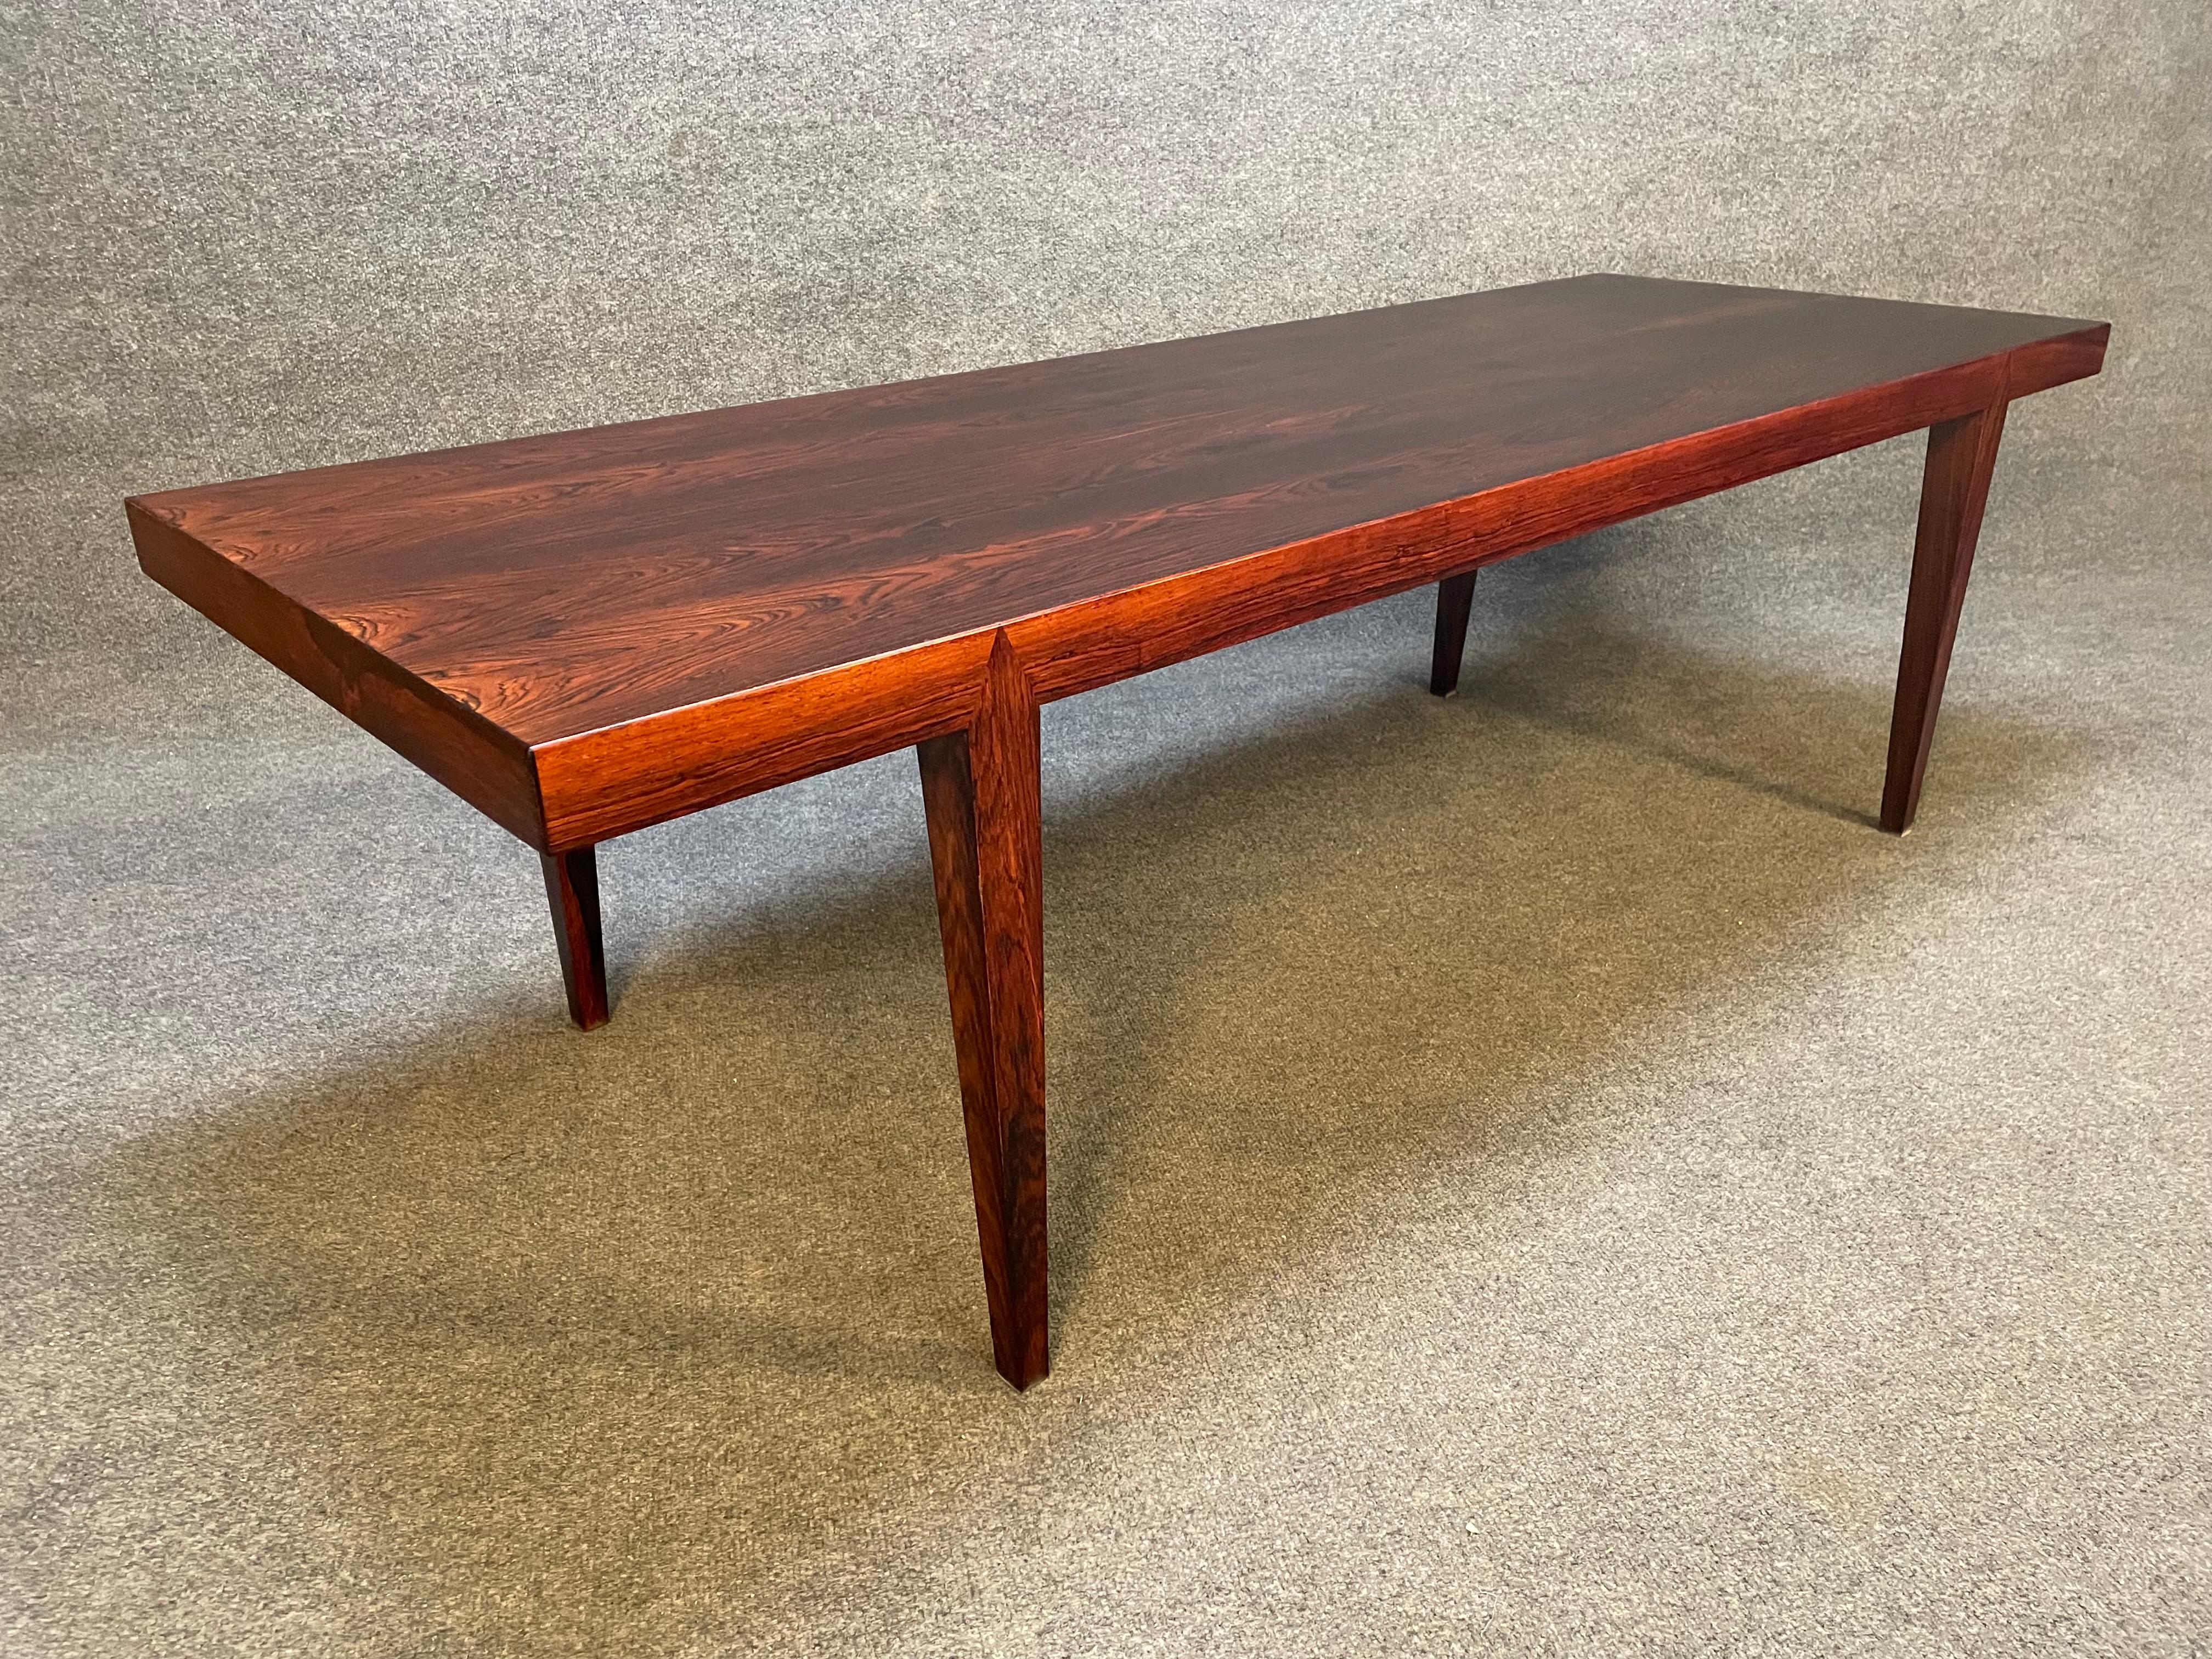 Here is a beautiful scandinavian modern cocktail table in rosewood designed by Severin Hansen Jr and manufactured by Haslev Mobelsnedkeri in Denmark in the 1960's.
This stunning table, recently refinished to perfection, features a vibrant rosewood